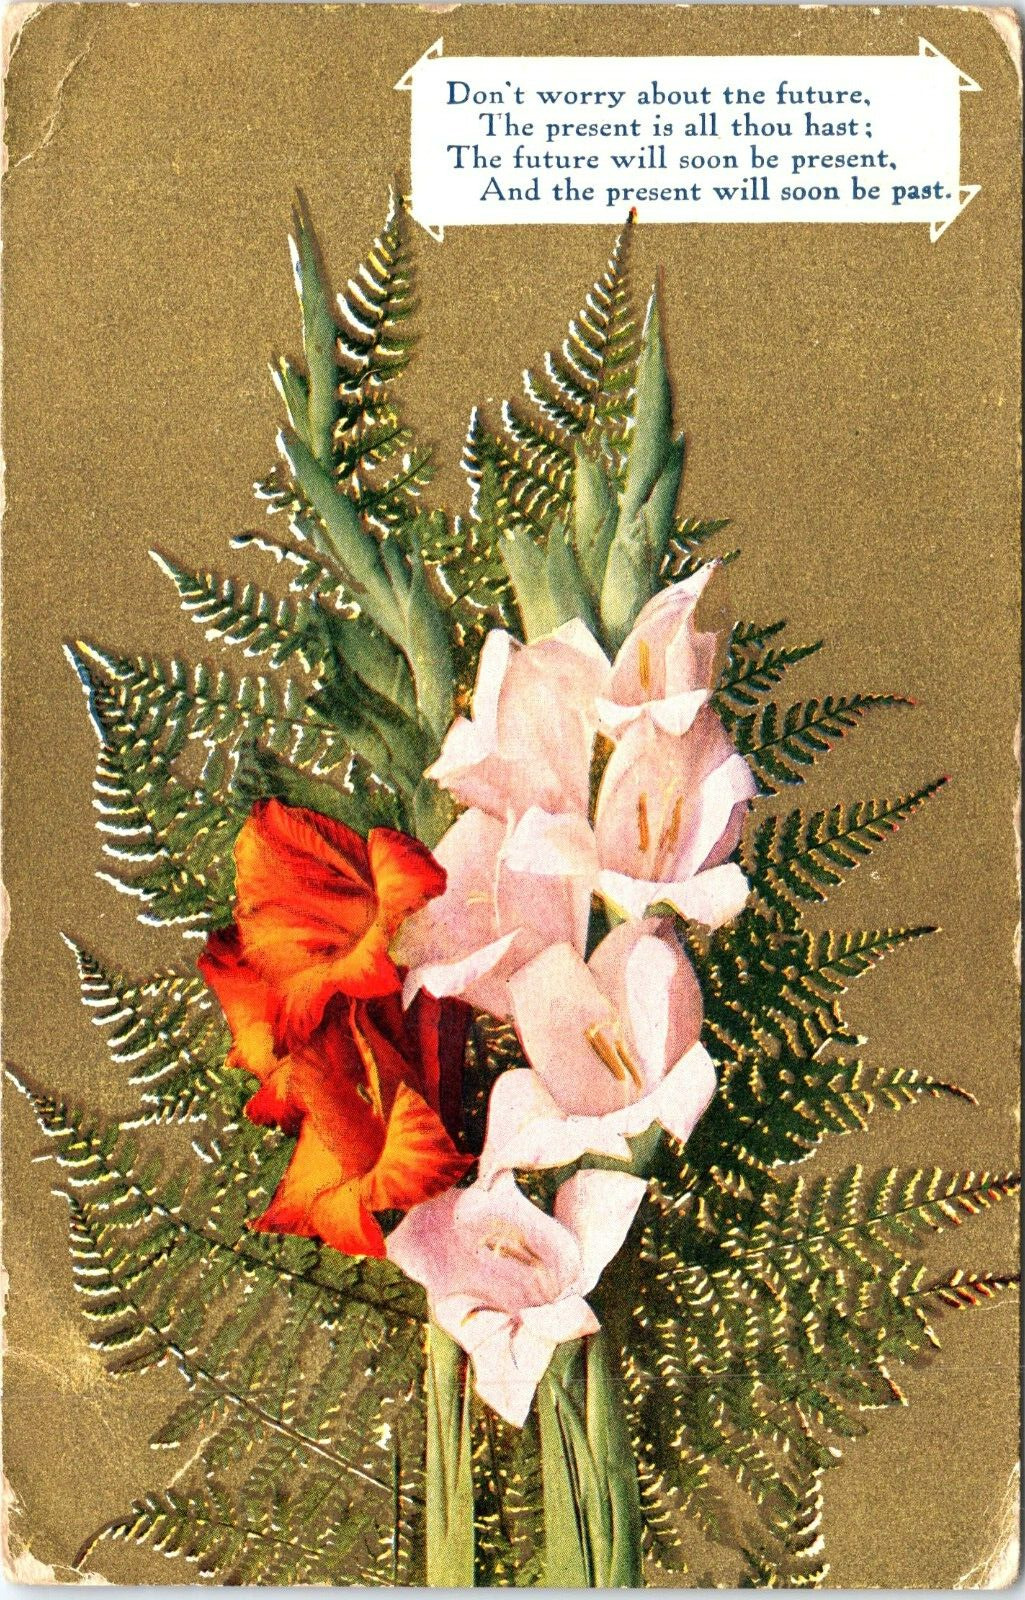 Antique Postcard with a Poem, Flowers and a 1910 Postmark with Optimism